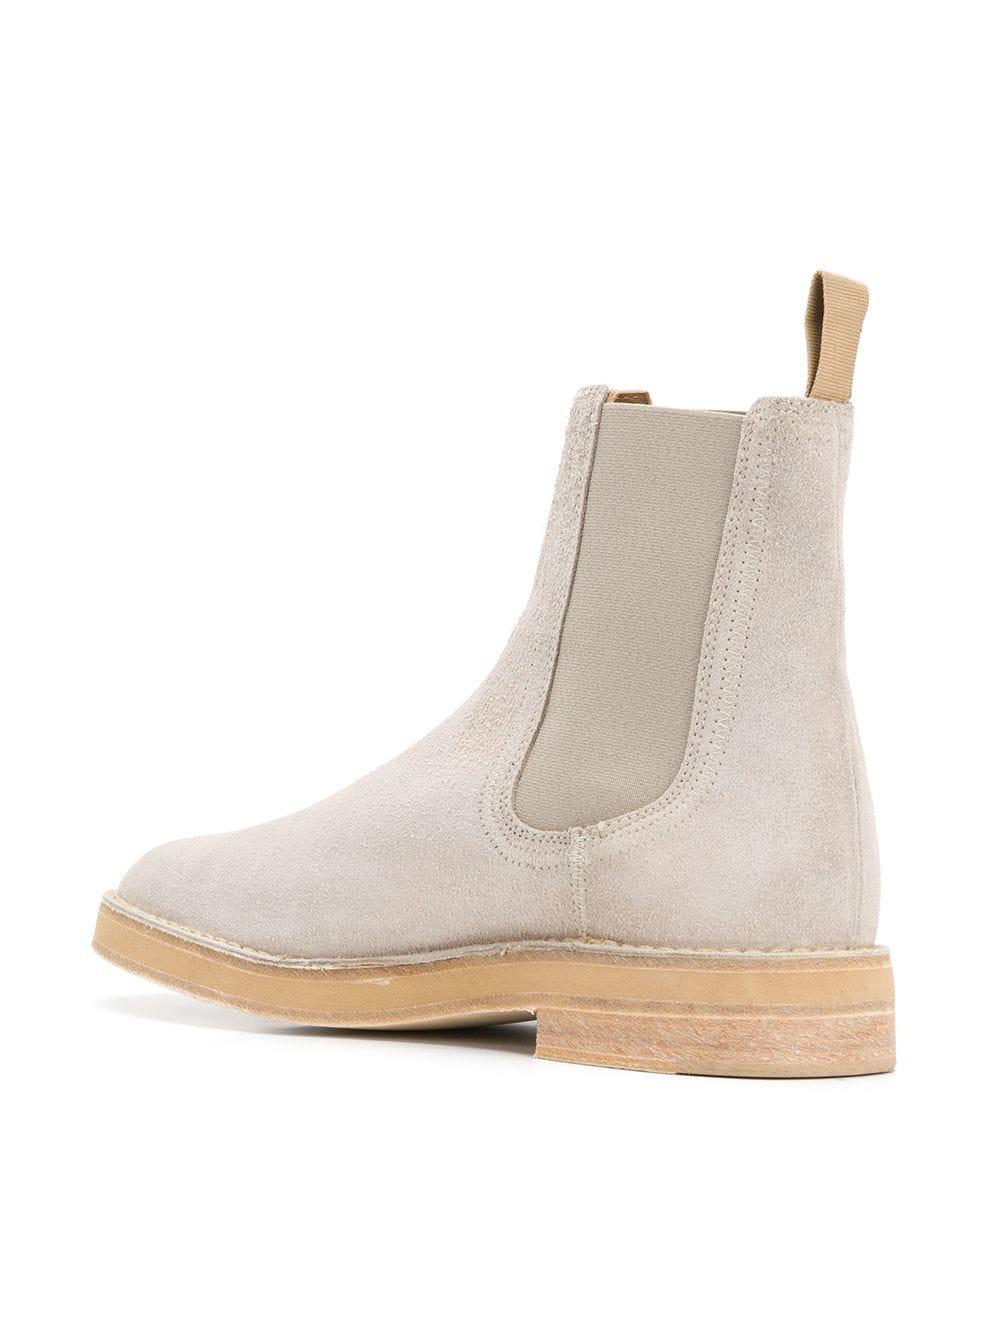 Yeezy Suede Adidas Season 6 Chelsea Boots in Grey (Gray) for Men - Lyst